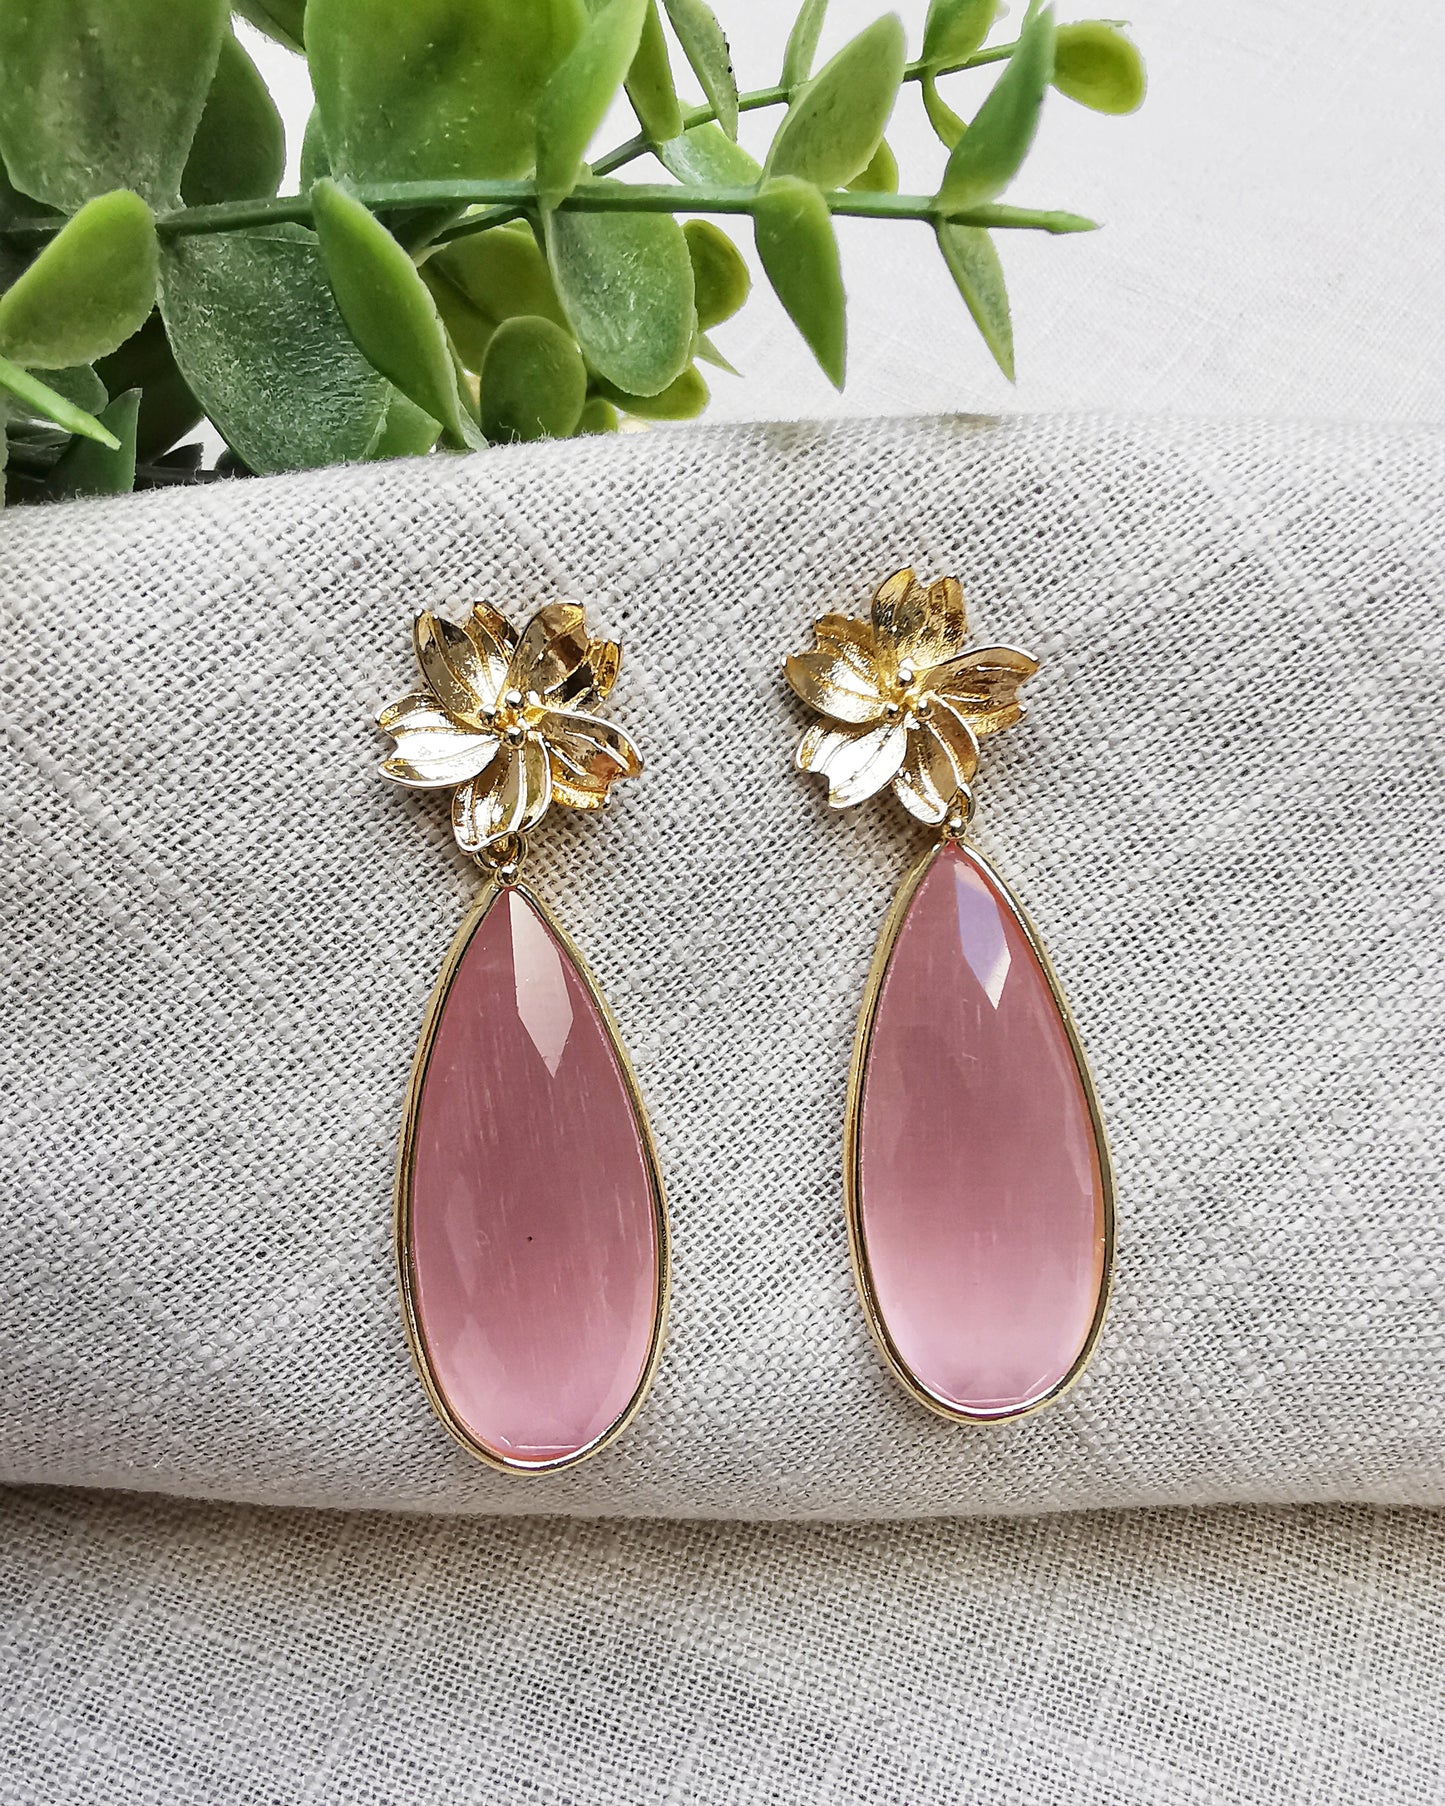 Pink Blush Monalisa Statement Earrings with Floral Ear Post- LIMITED EDITION